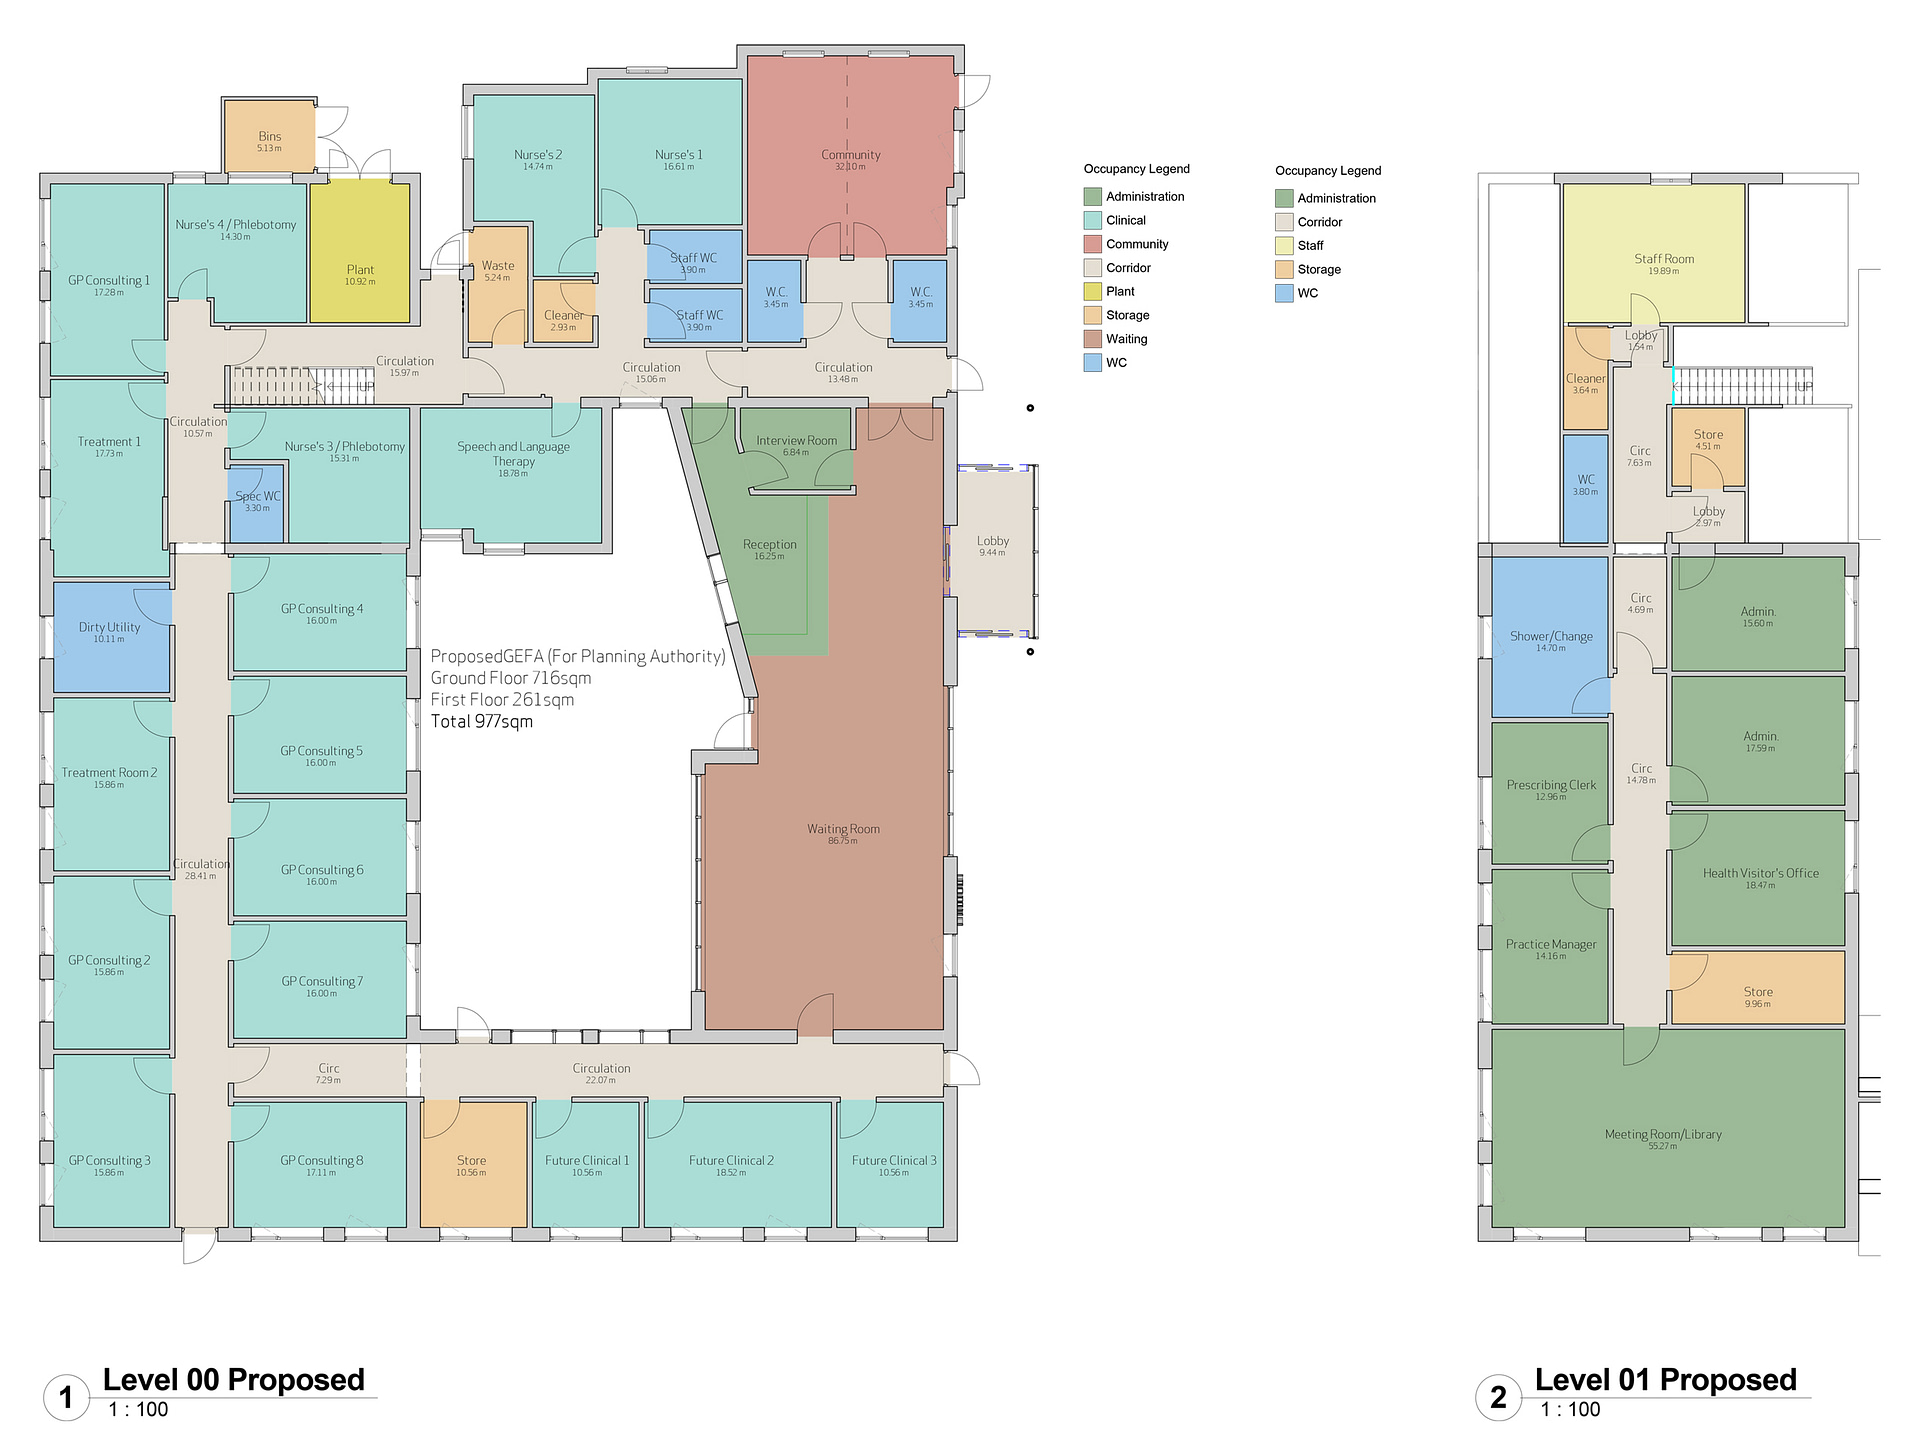 North Cornelly Surgery, Wales - Floor Plans